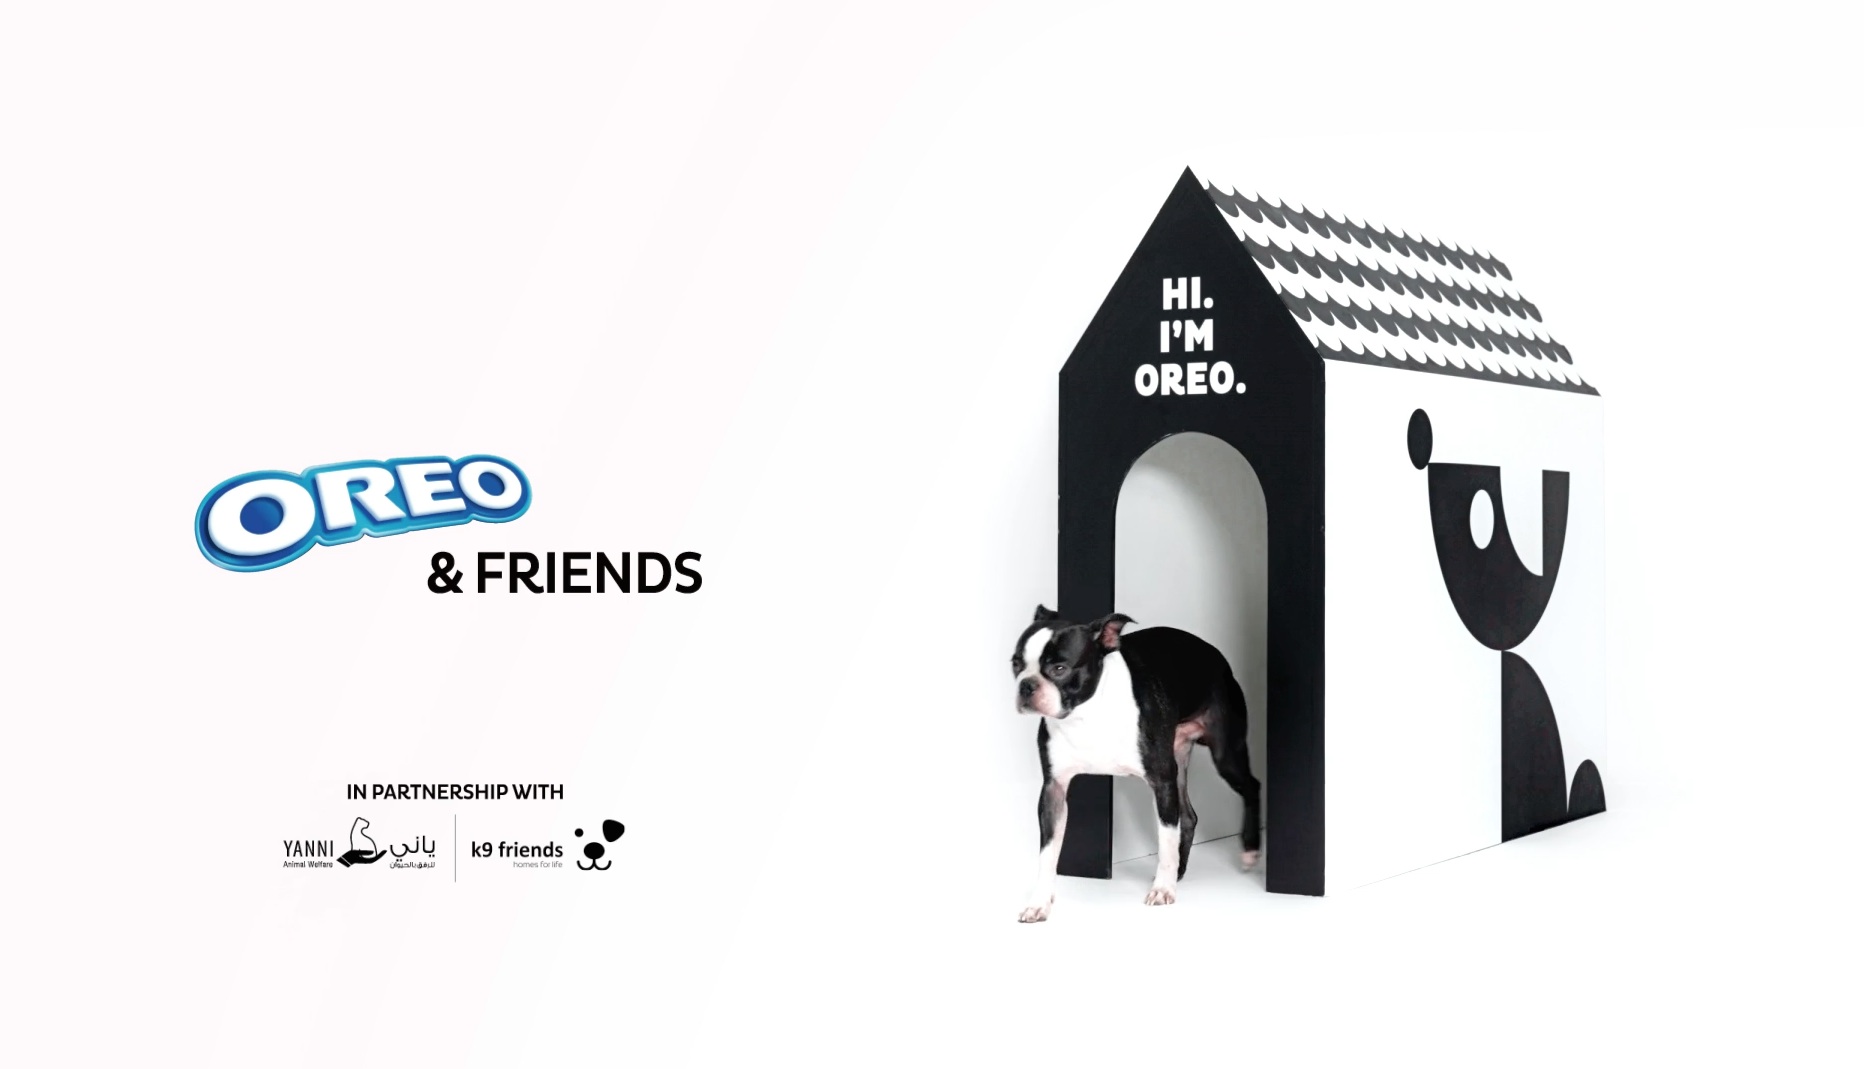 The ‘Oreo & Friends’ campaign by Saatchi & Saatchi UAE rolls out to drive pet adoption